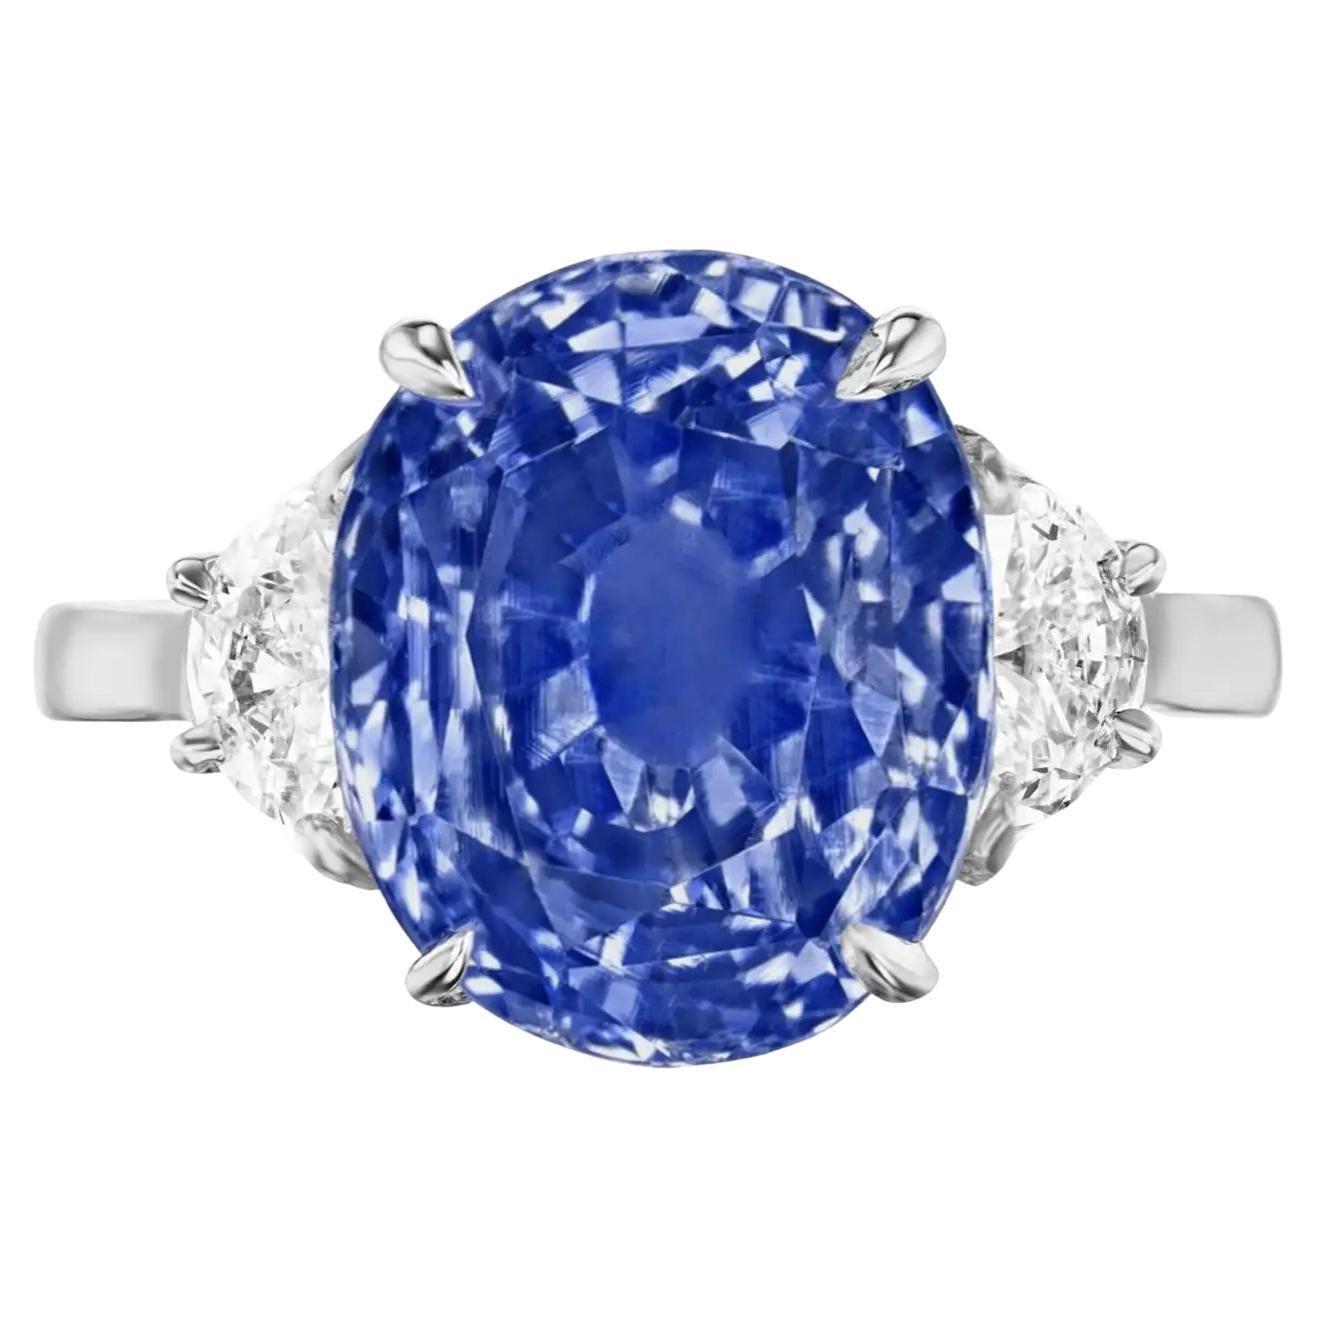 Step into the world of unparalleled luxury with our exquisite 3.60-carat Blue Sapphire, a rare gem from the coveted Kashmir region. This extraordinary gemstone is a celebration of nature's finest artistry, boasting a mesmerizing deep blue hue that